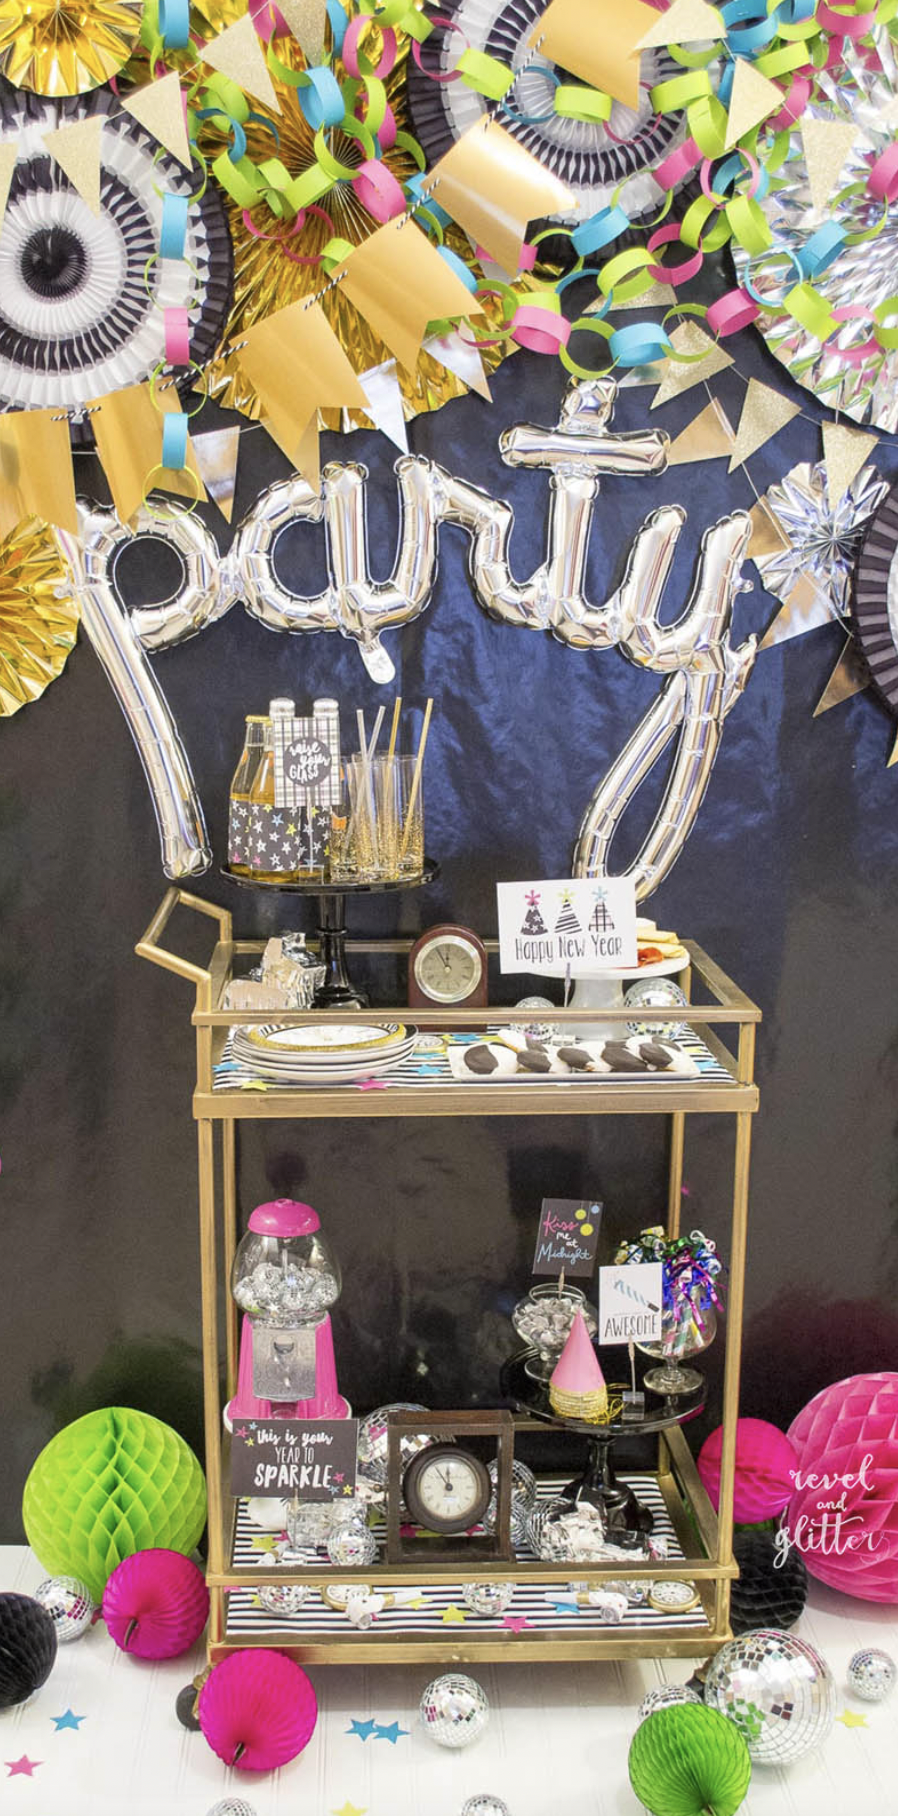 The Shopper's Guide to New Year's Eve Decor Ideas  50th birthday party,  Black gold party, Black and gold balloons